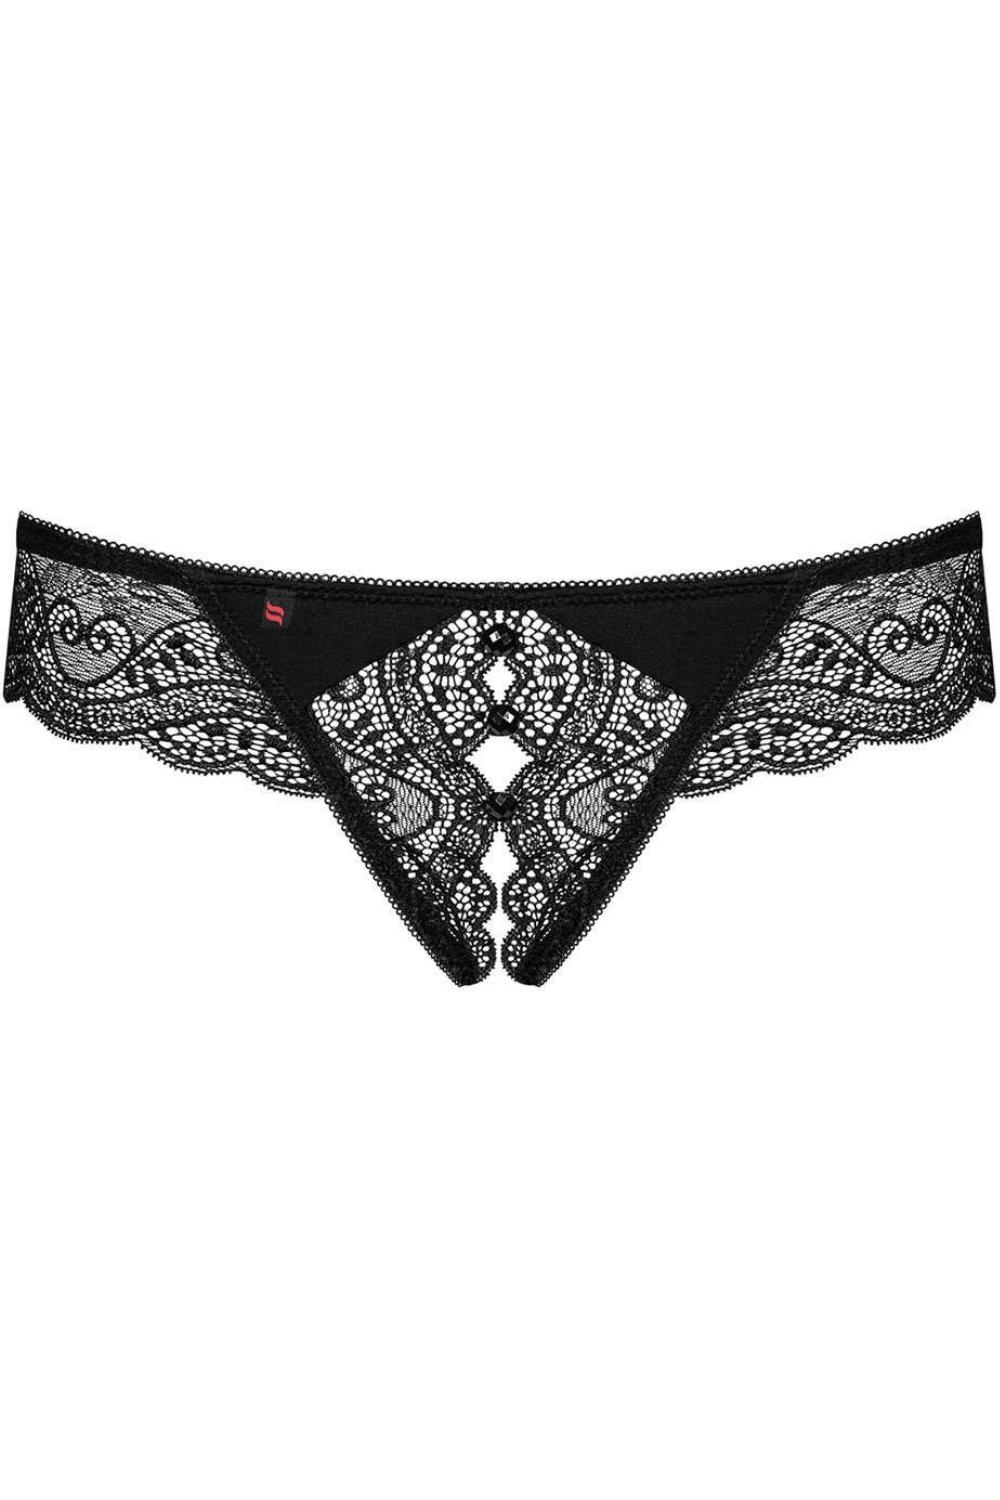 Obsessive Miamor Crotchless Thong